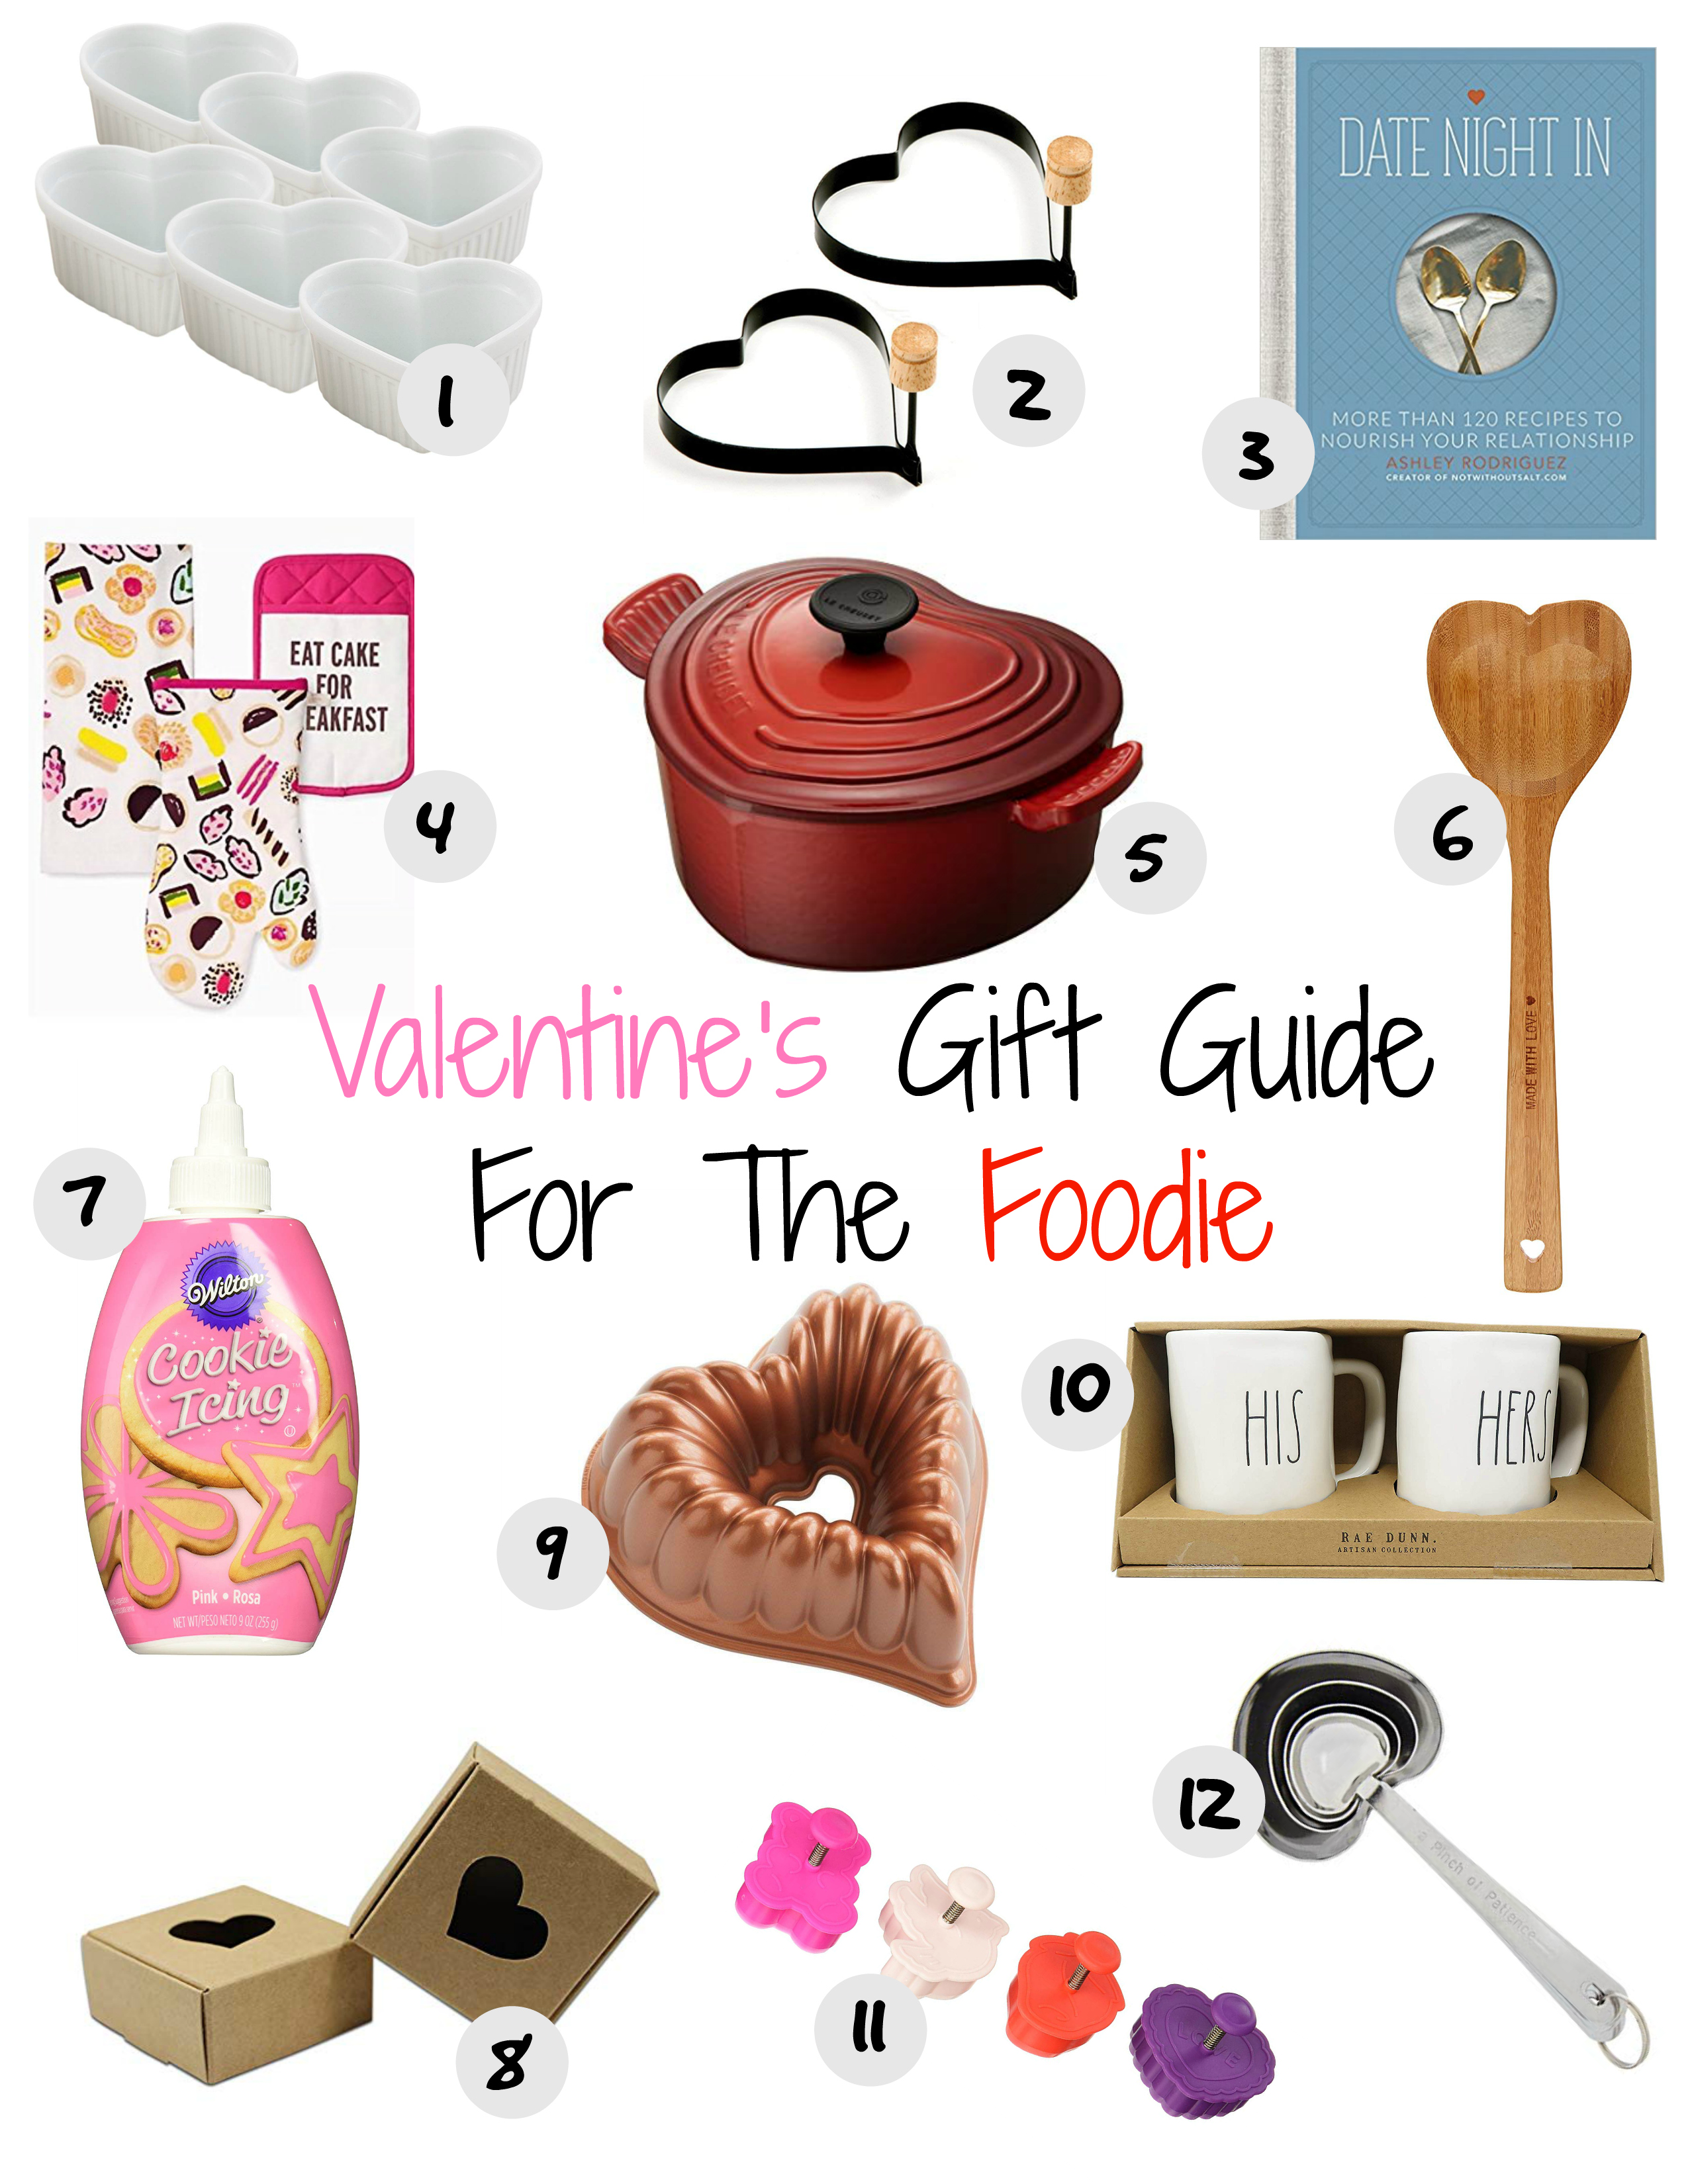 Valentine’s Day Gift Guide For Foodies